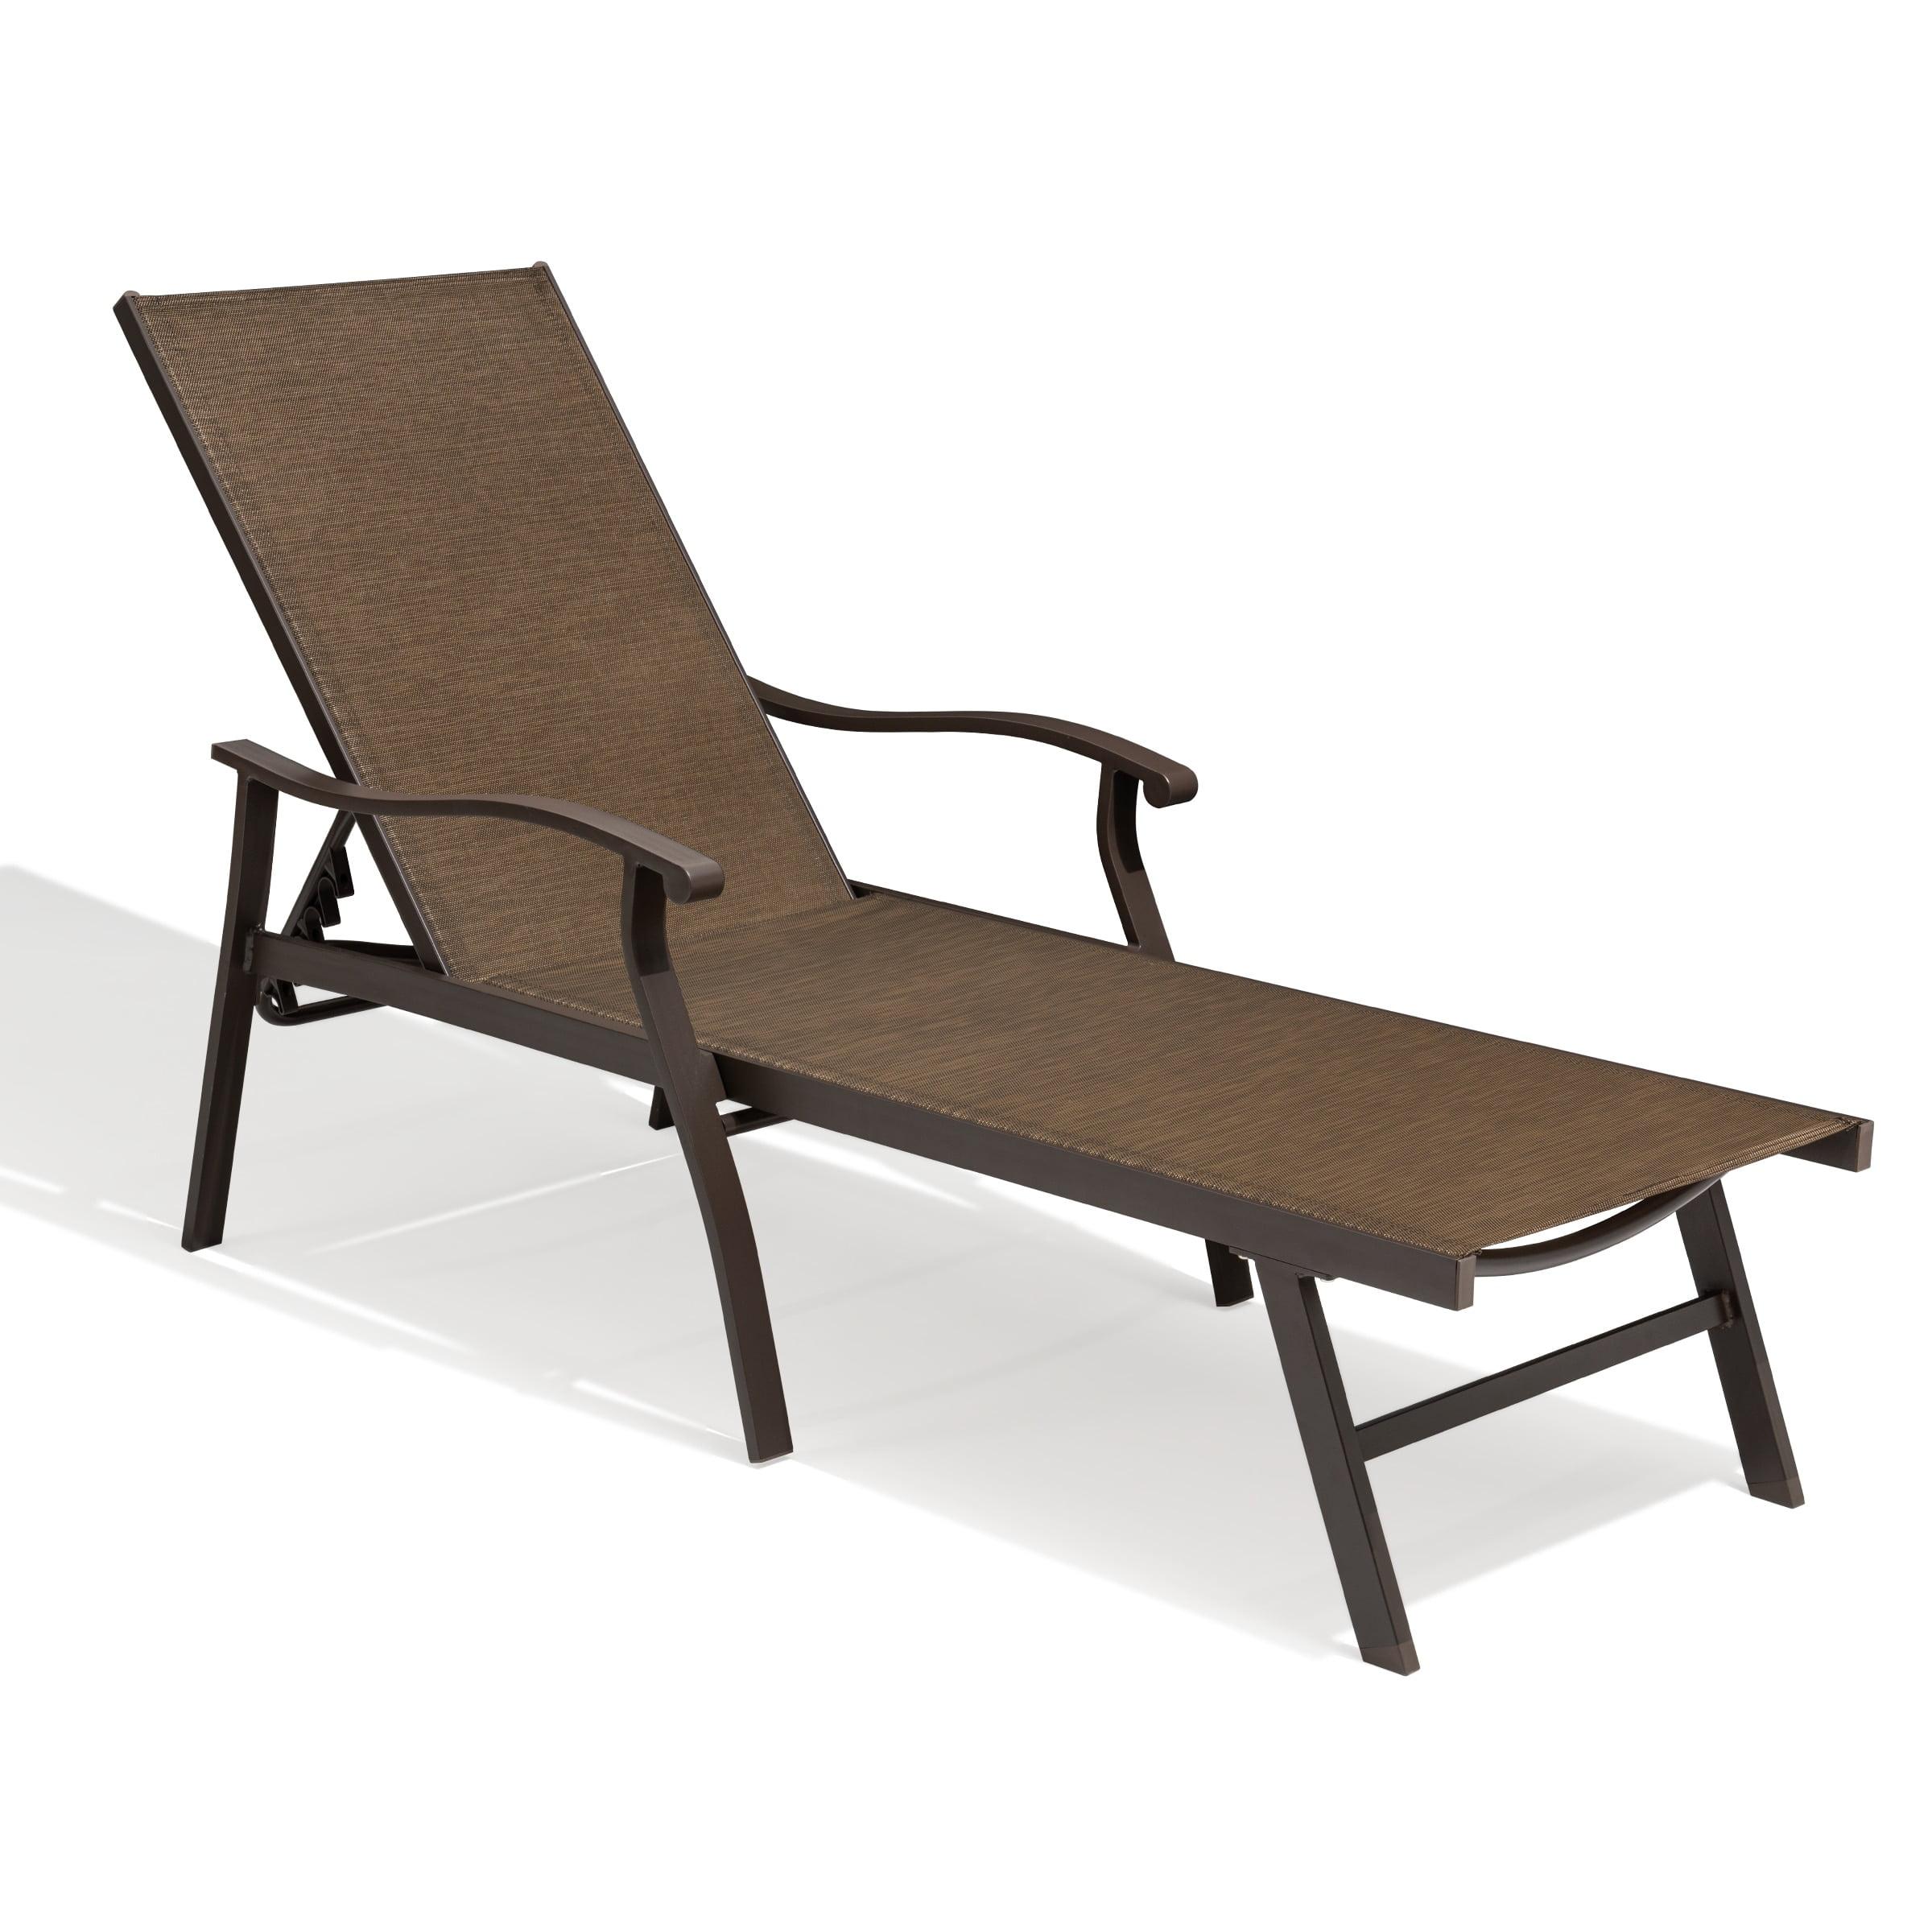 Elegant Brown Aluminum Adjustable Outdoor Chaise Lounge with Curved Armrests